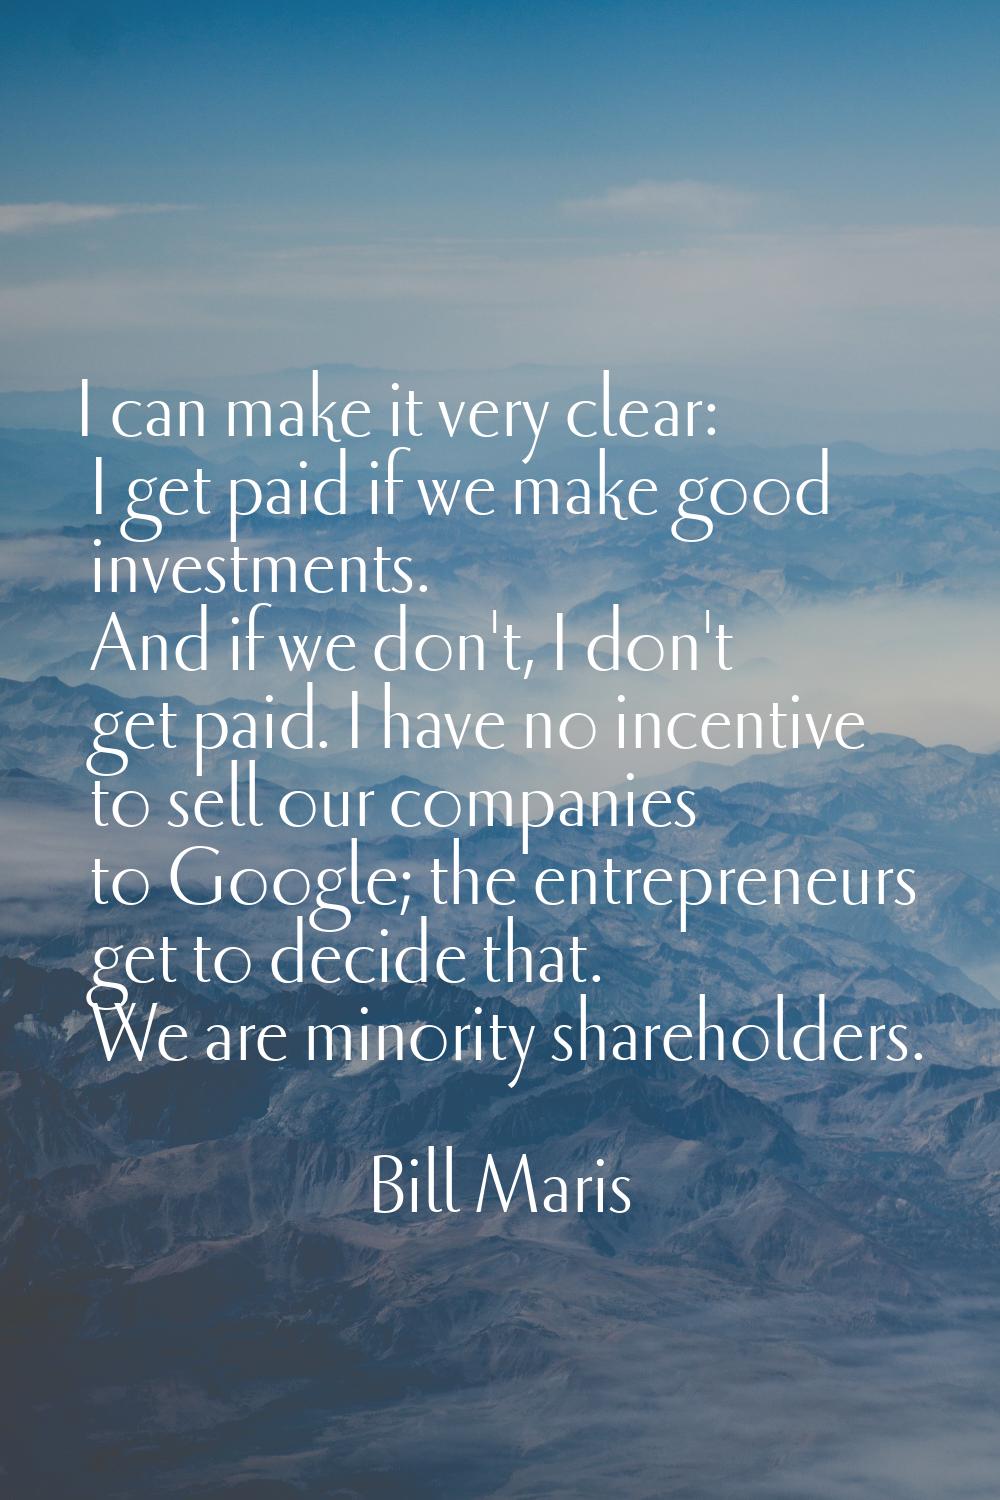 I can make it very clear: I get paid if we make good investments. And if we don't, I don't get paid